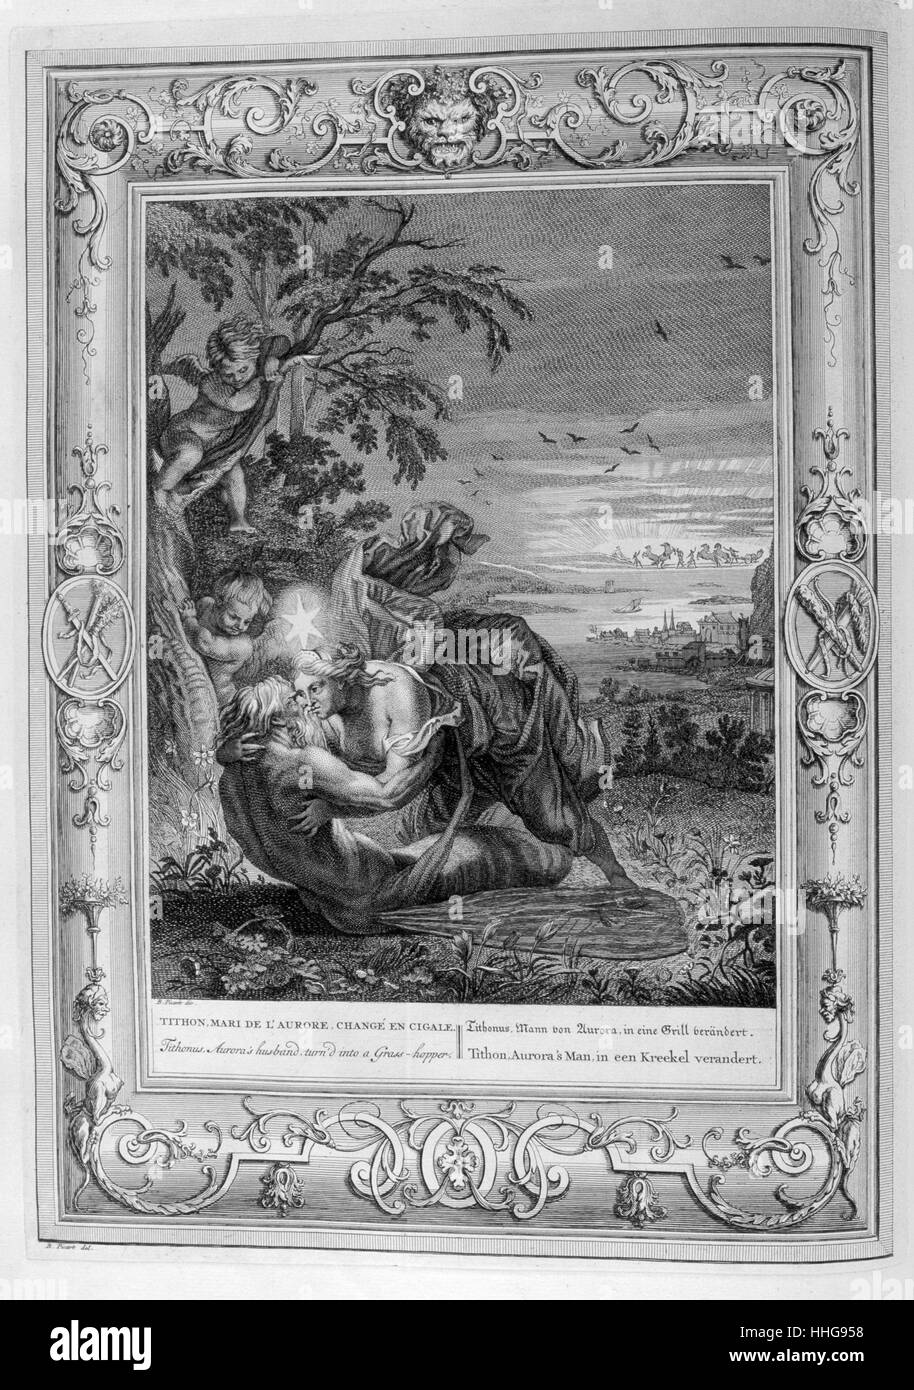 Titon and Aurora. Engraved illustration from 'The Temple of the Muses', 1733. This book represented remarkable events of antiquity drawn and engraved by Bernard Picart (1673-1733). In Greek mythology, Tithonus (Titon) was the lover of Eos (known in Roman mythology as Aurora). Stock Photo